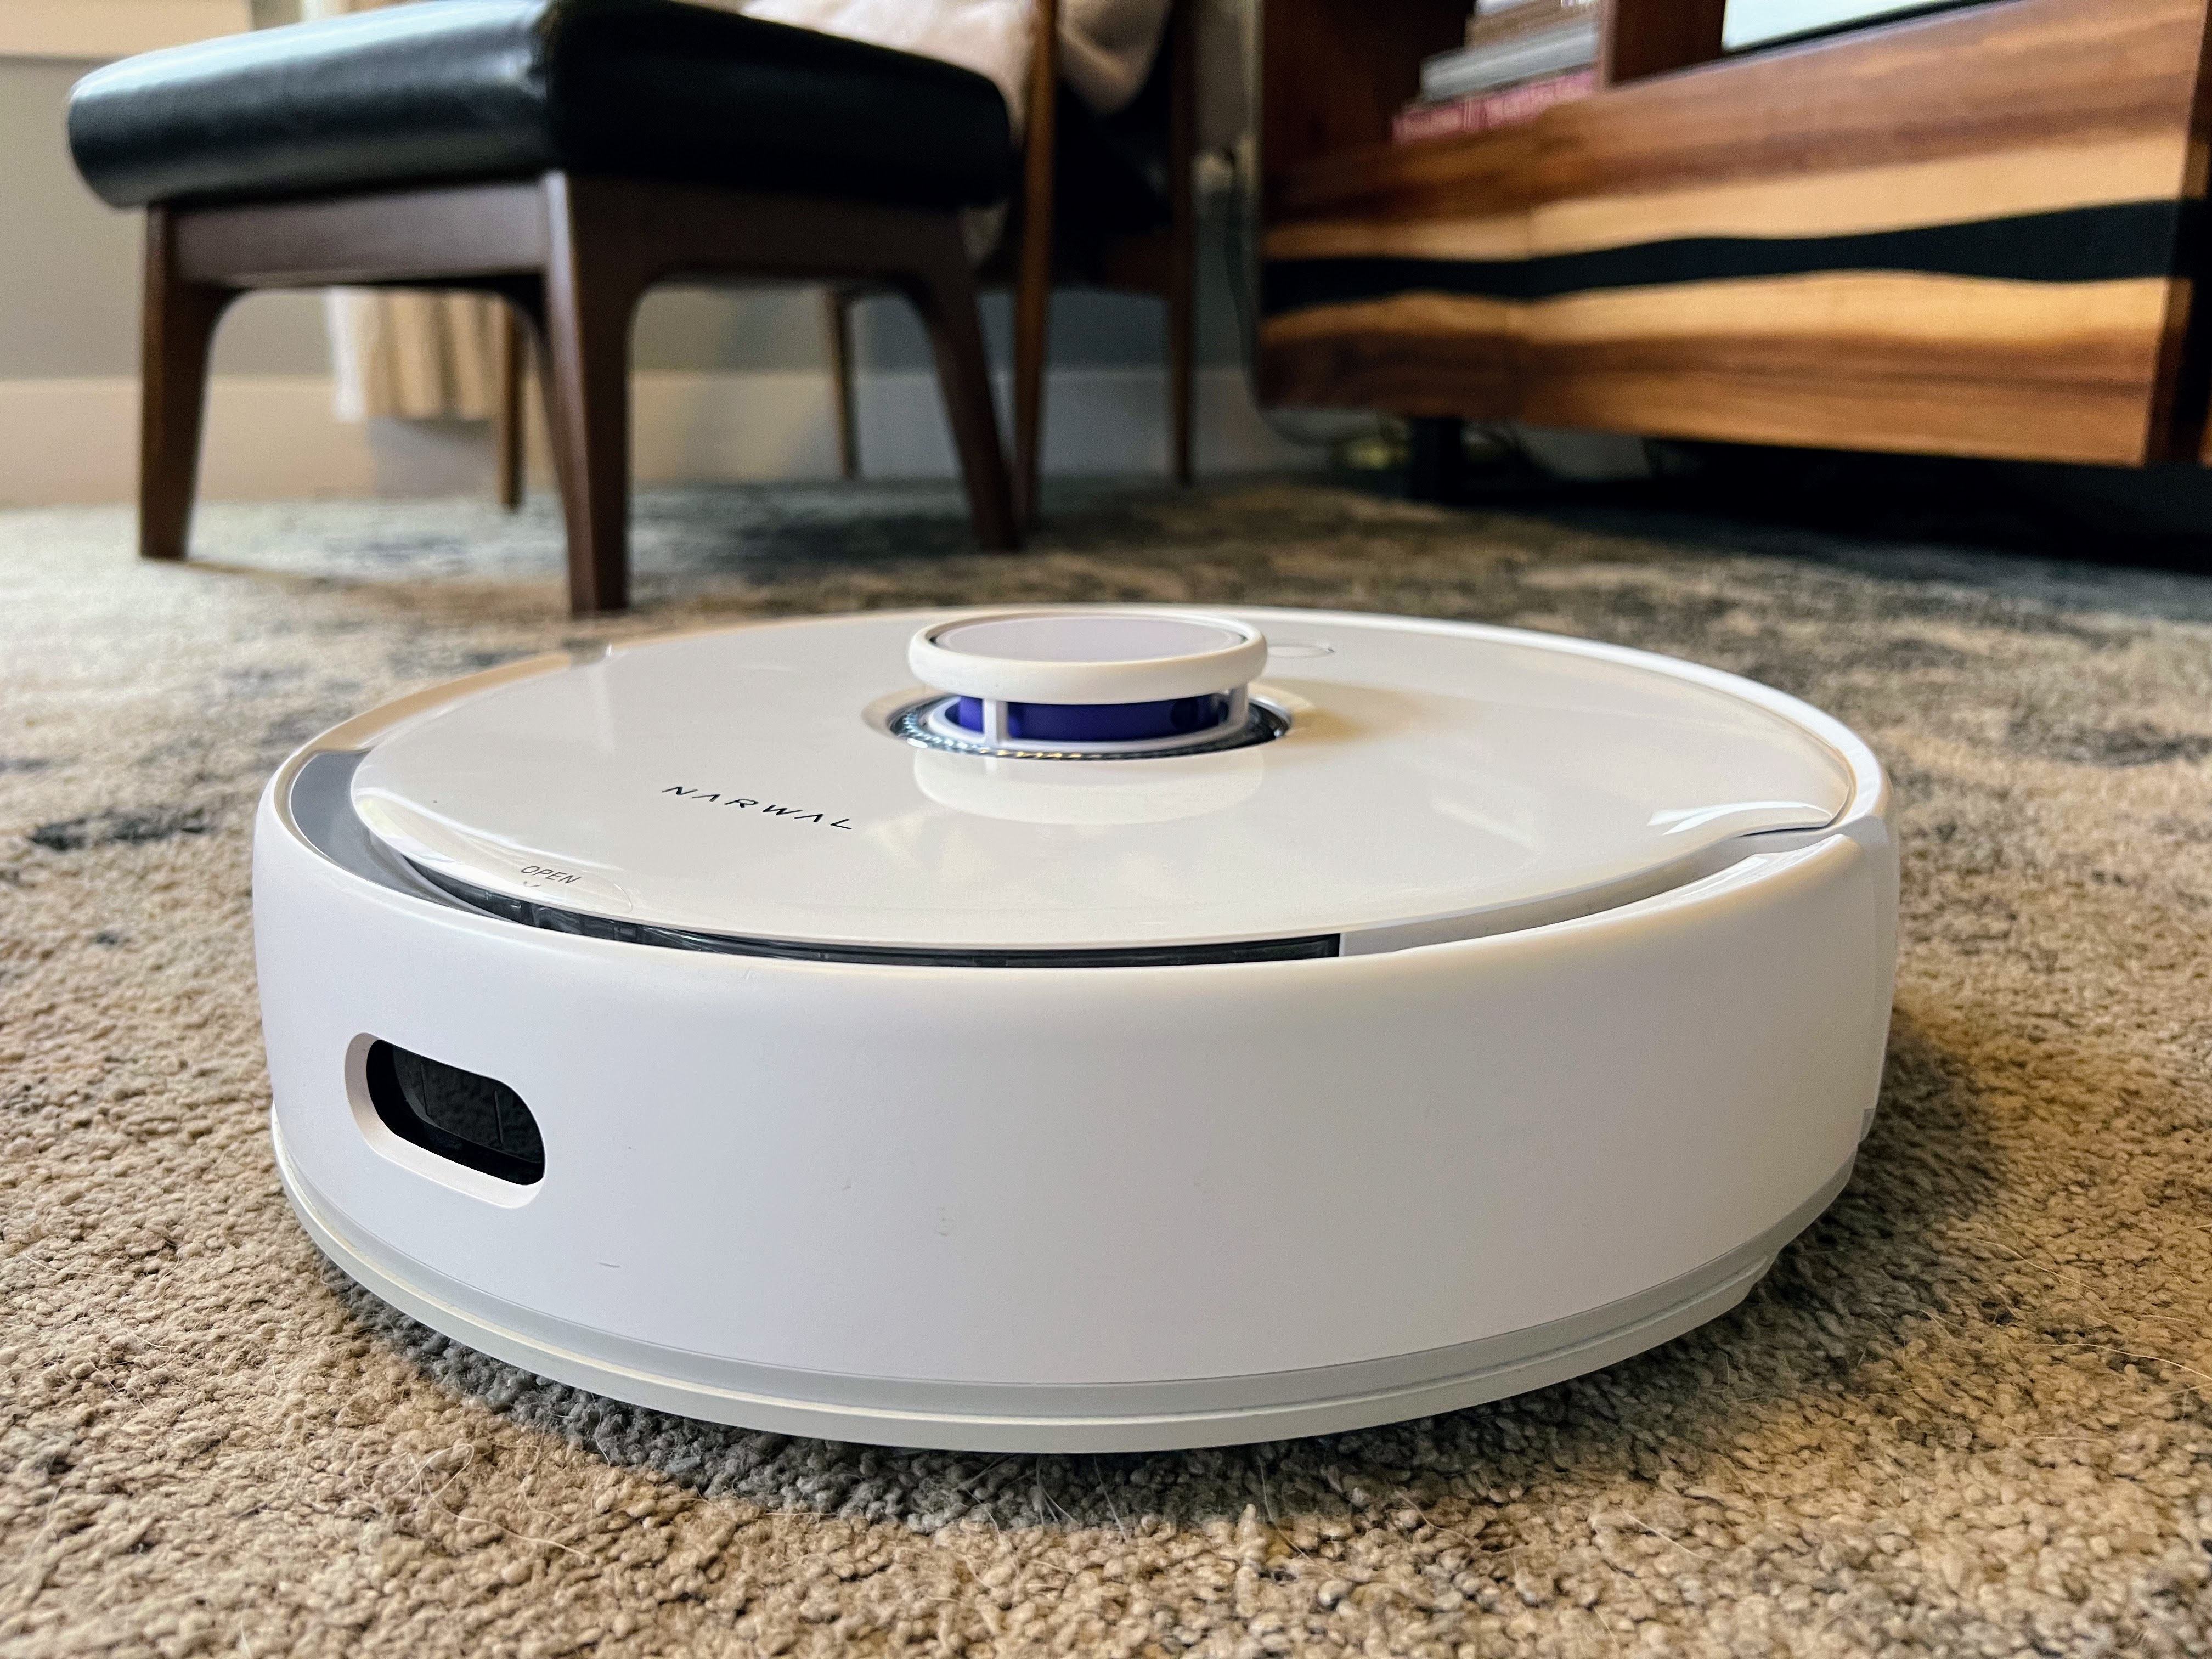 A Narwal robot vacuum sits on a living room carpet.